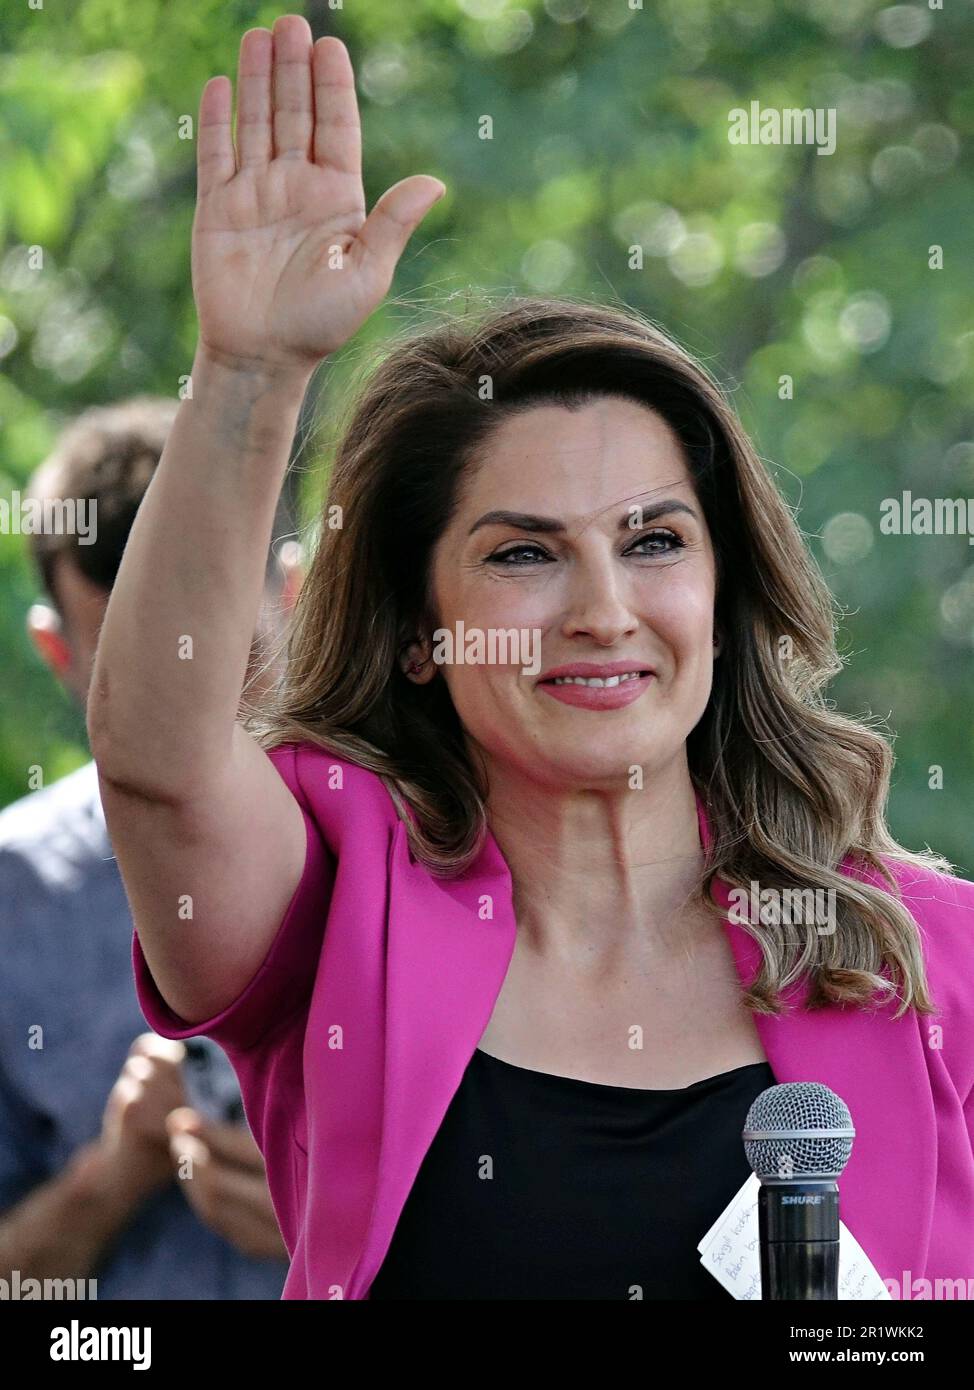 Diyarbakir, Turkey. 13th May, 2023. Basak Demirtas greets people at the Green Left Party's Diyarbakir rally. Basak Demirtas, the wife of Selahattin Demirtas, the former Co-Leader of the Peoples' Democratic Party (HDP), who has been held in prison in Turkey for 7 years, also made a speech by attending a rally organized by the Green Left Party (YSP) in Diyarbakir. (Photo by Mehmet Masum Suer/SOPA Images/Sipa USA) Credit: Sipa USA/Alamy Live News Stock Photo